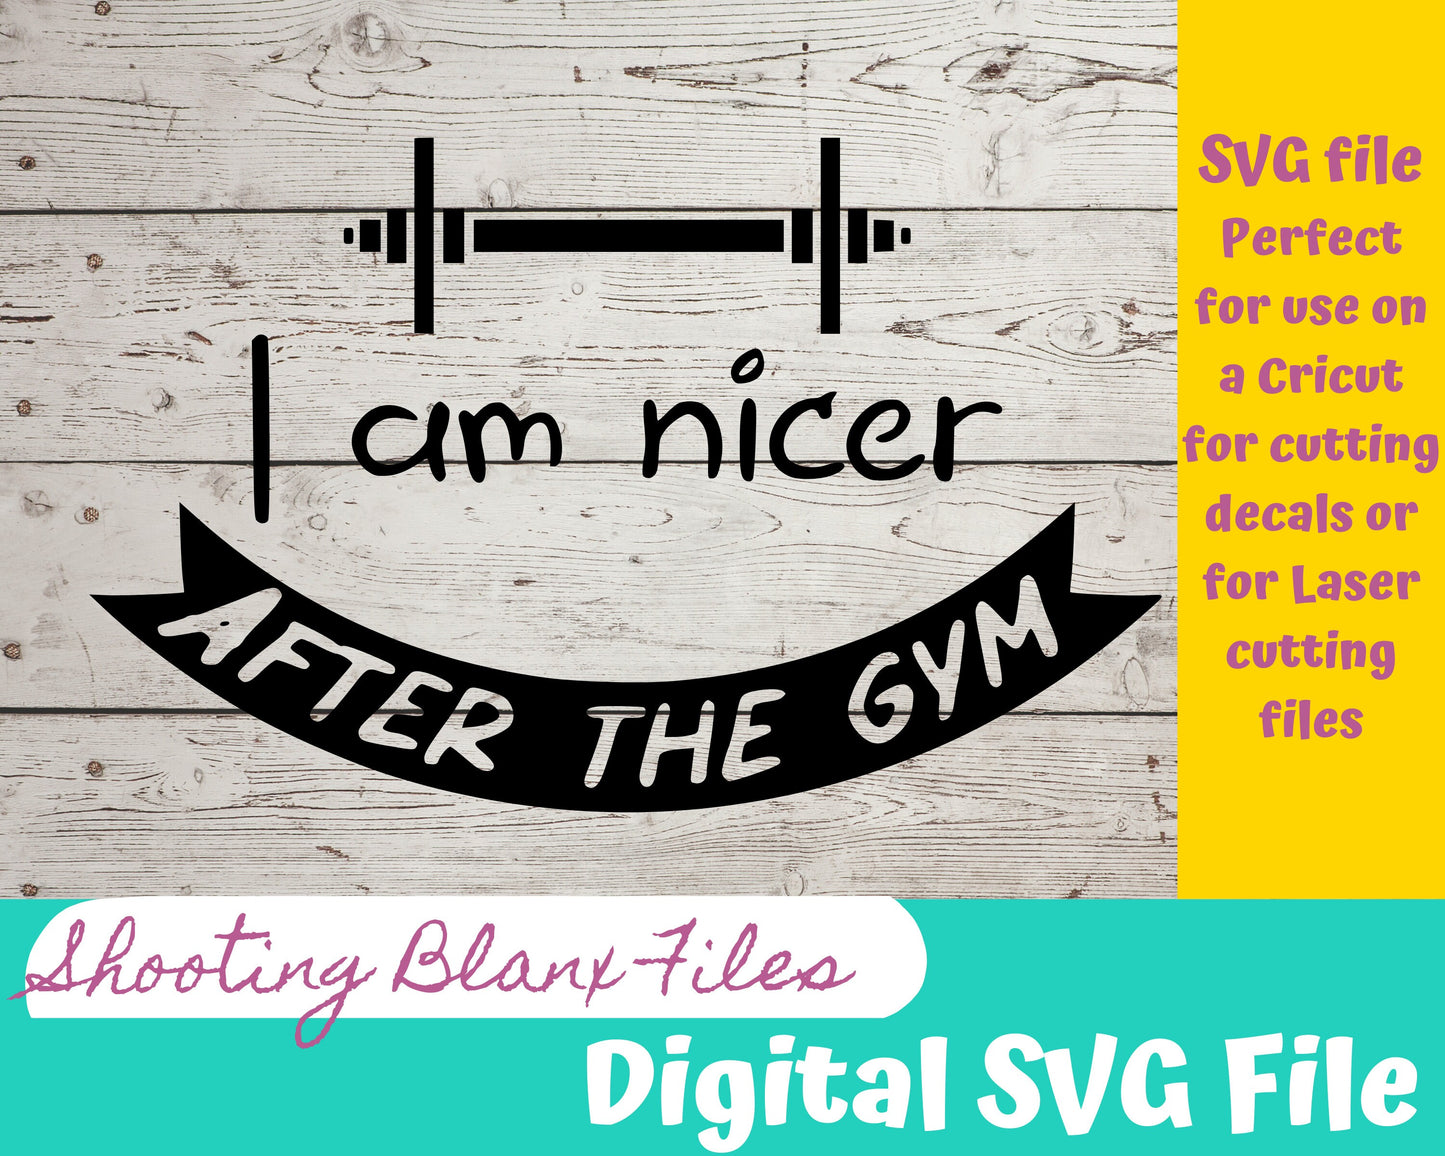 I am nicer after the gym SVG file perfect for Cricut, Cameo, or Silhouette, laser engraving Glowforge Workout, Muscles, weights, Dumbbell